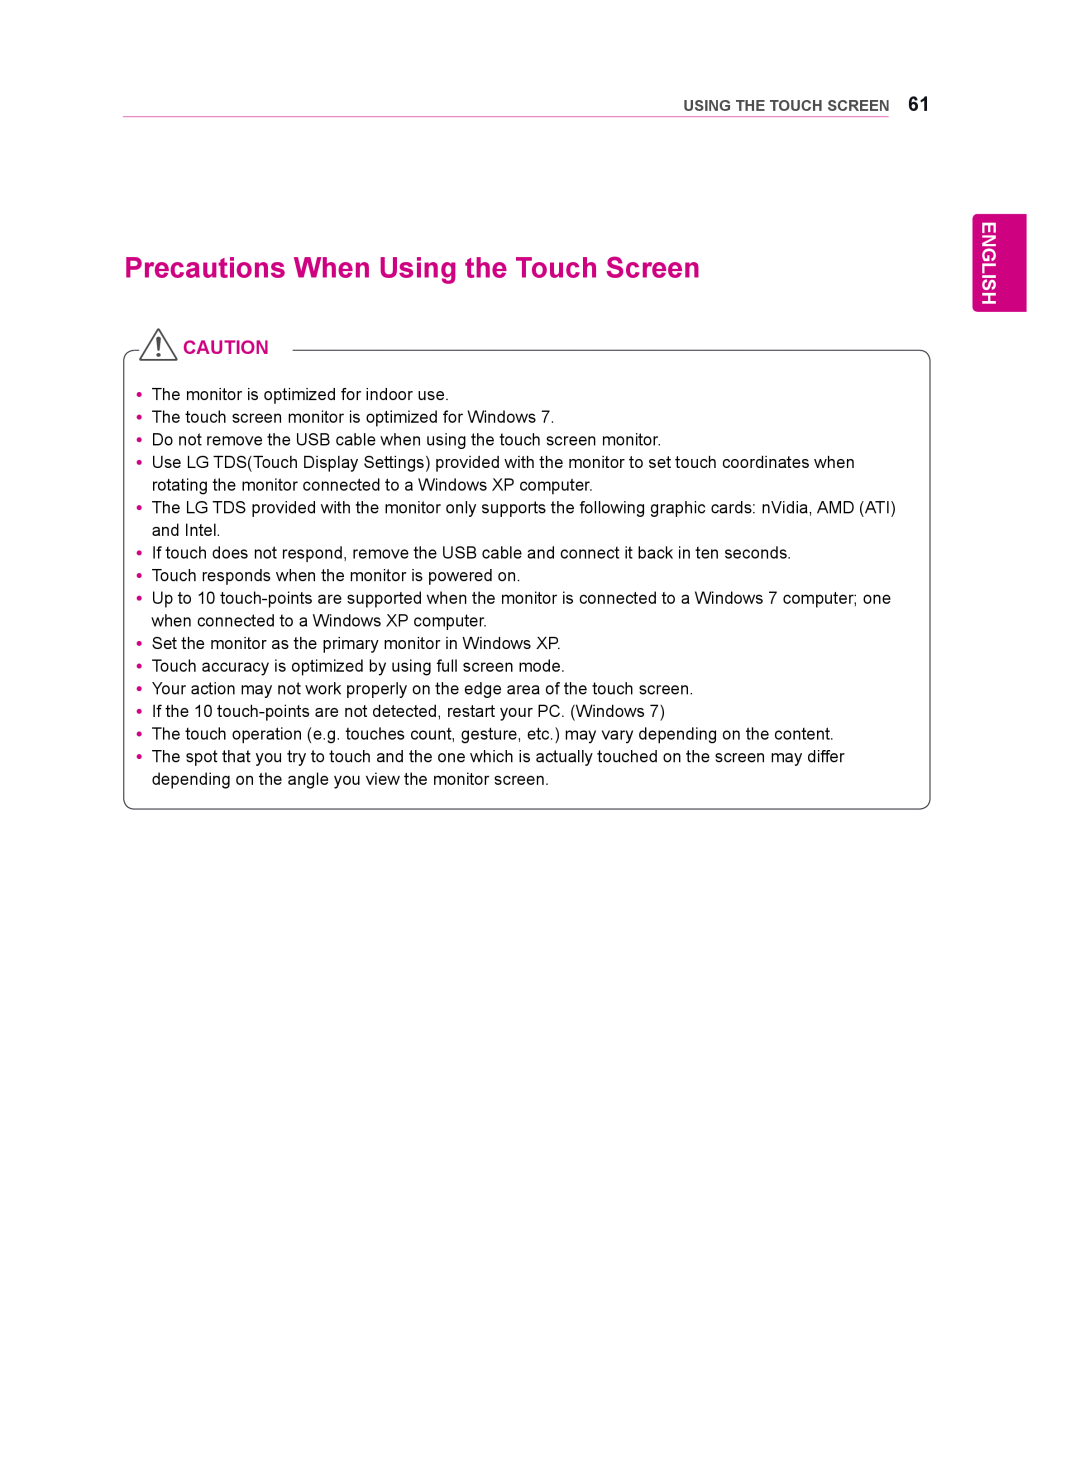 LG Electronics 42WT30MS, 55WT30MS, 47WT30MS owner manual Precautions When Using the Touch Screen, English 